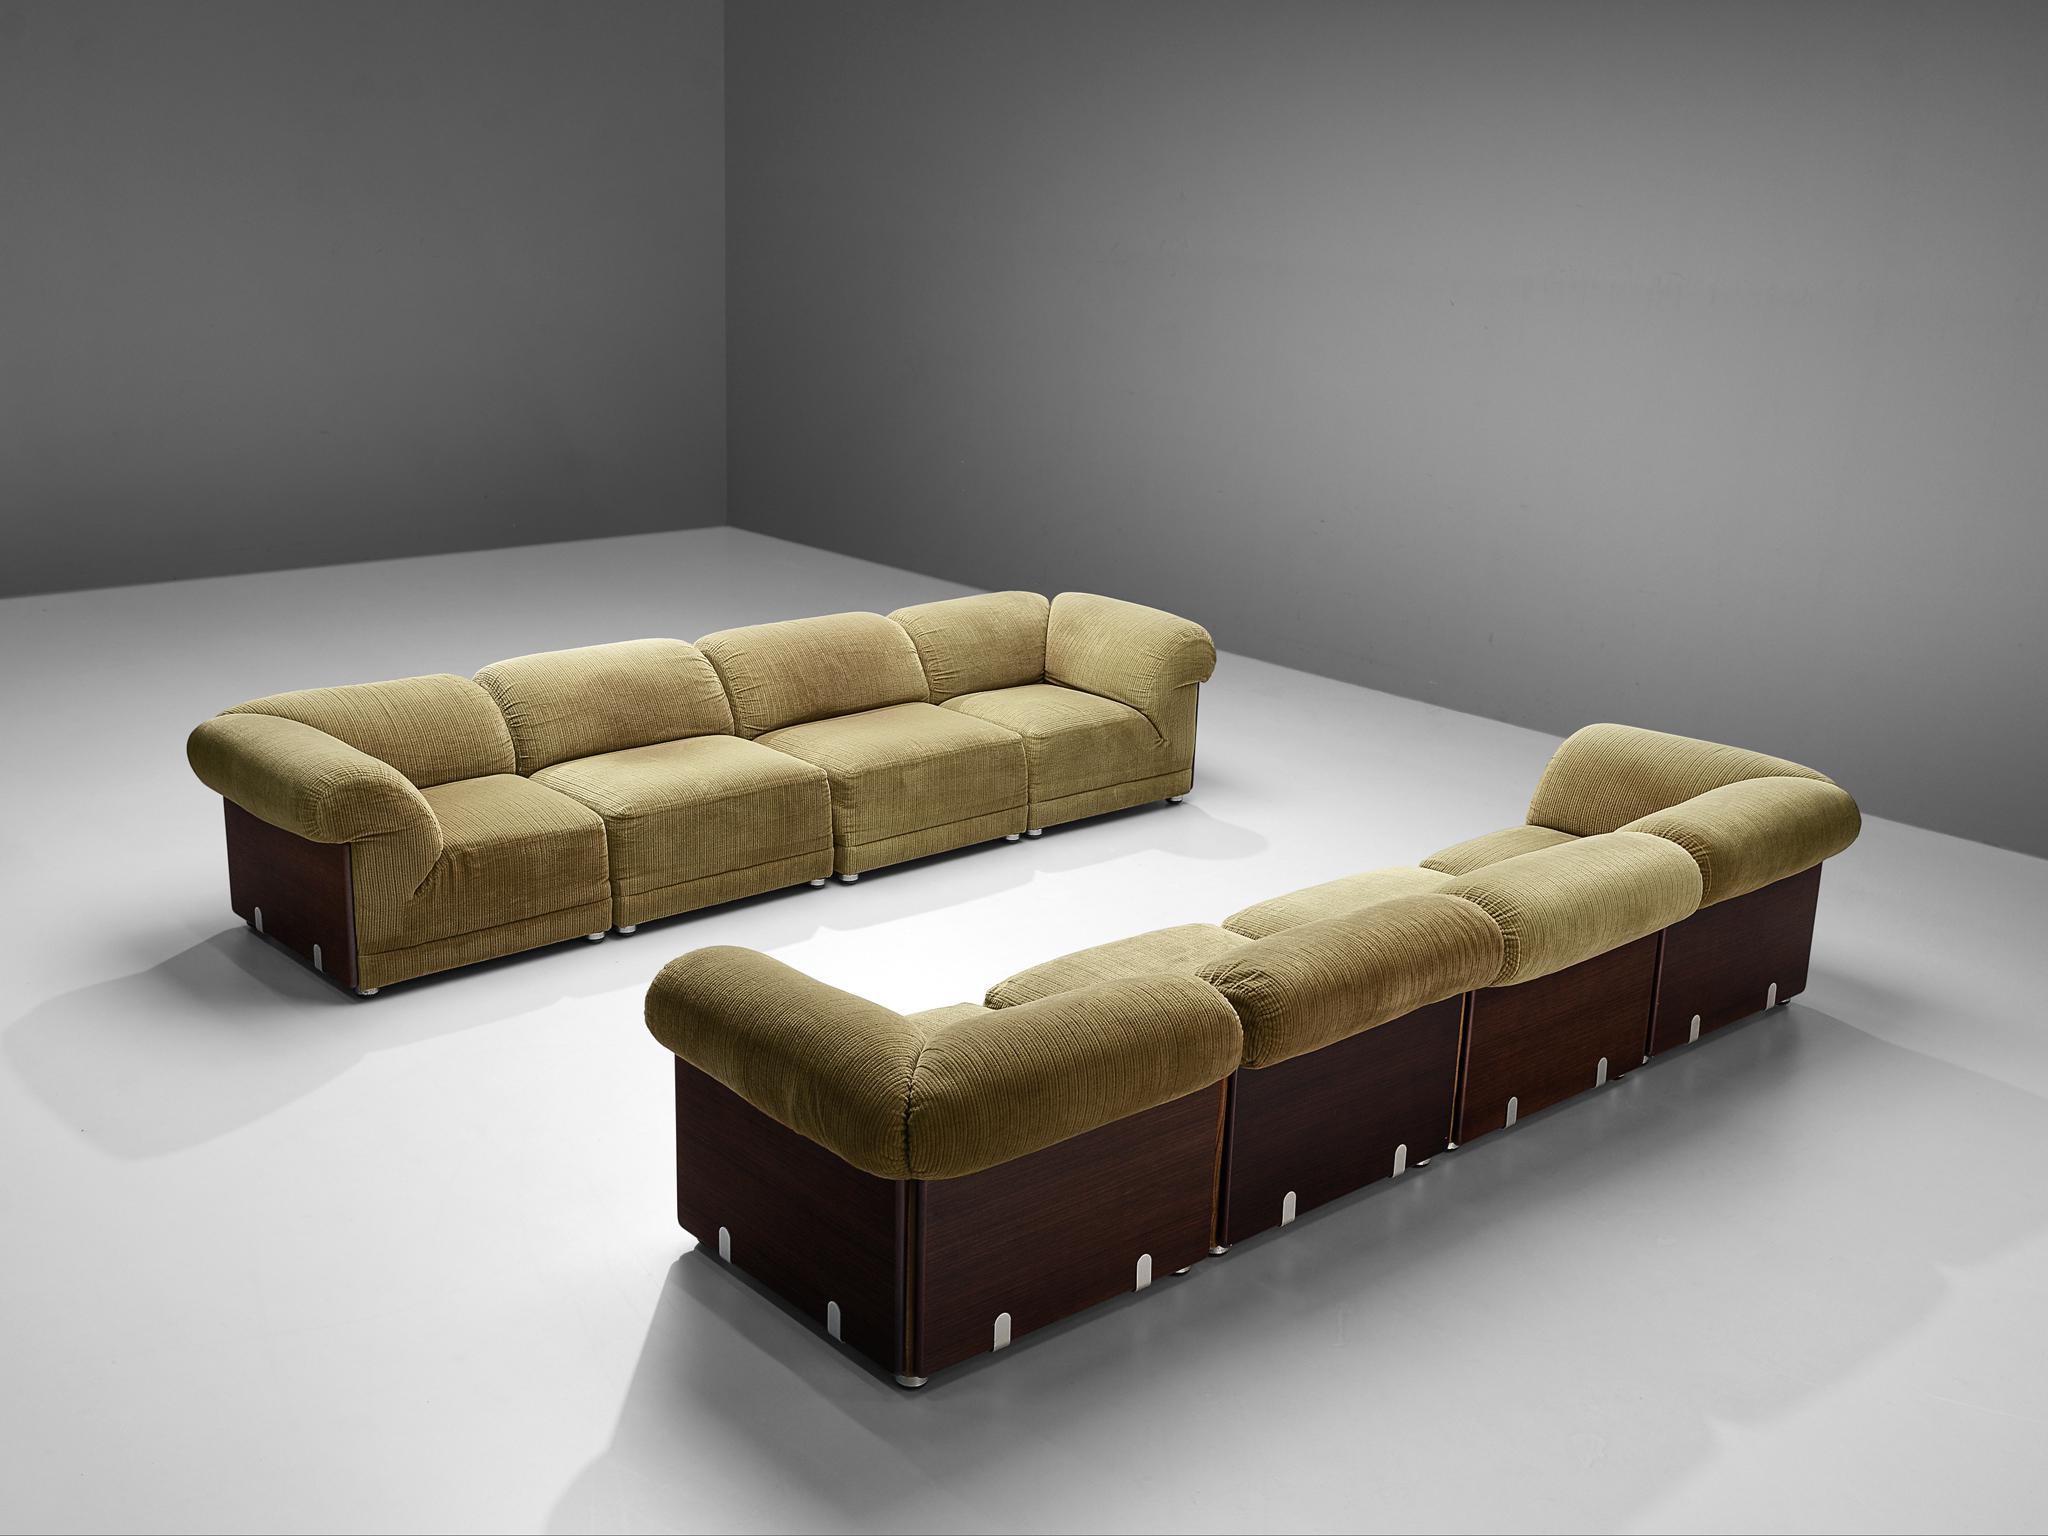 Metal Sectional Sofa with Side Tables in Structured Velvet Upholstery